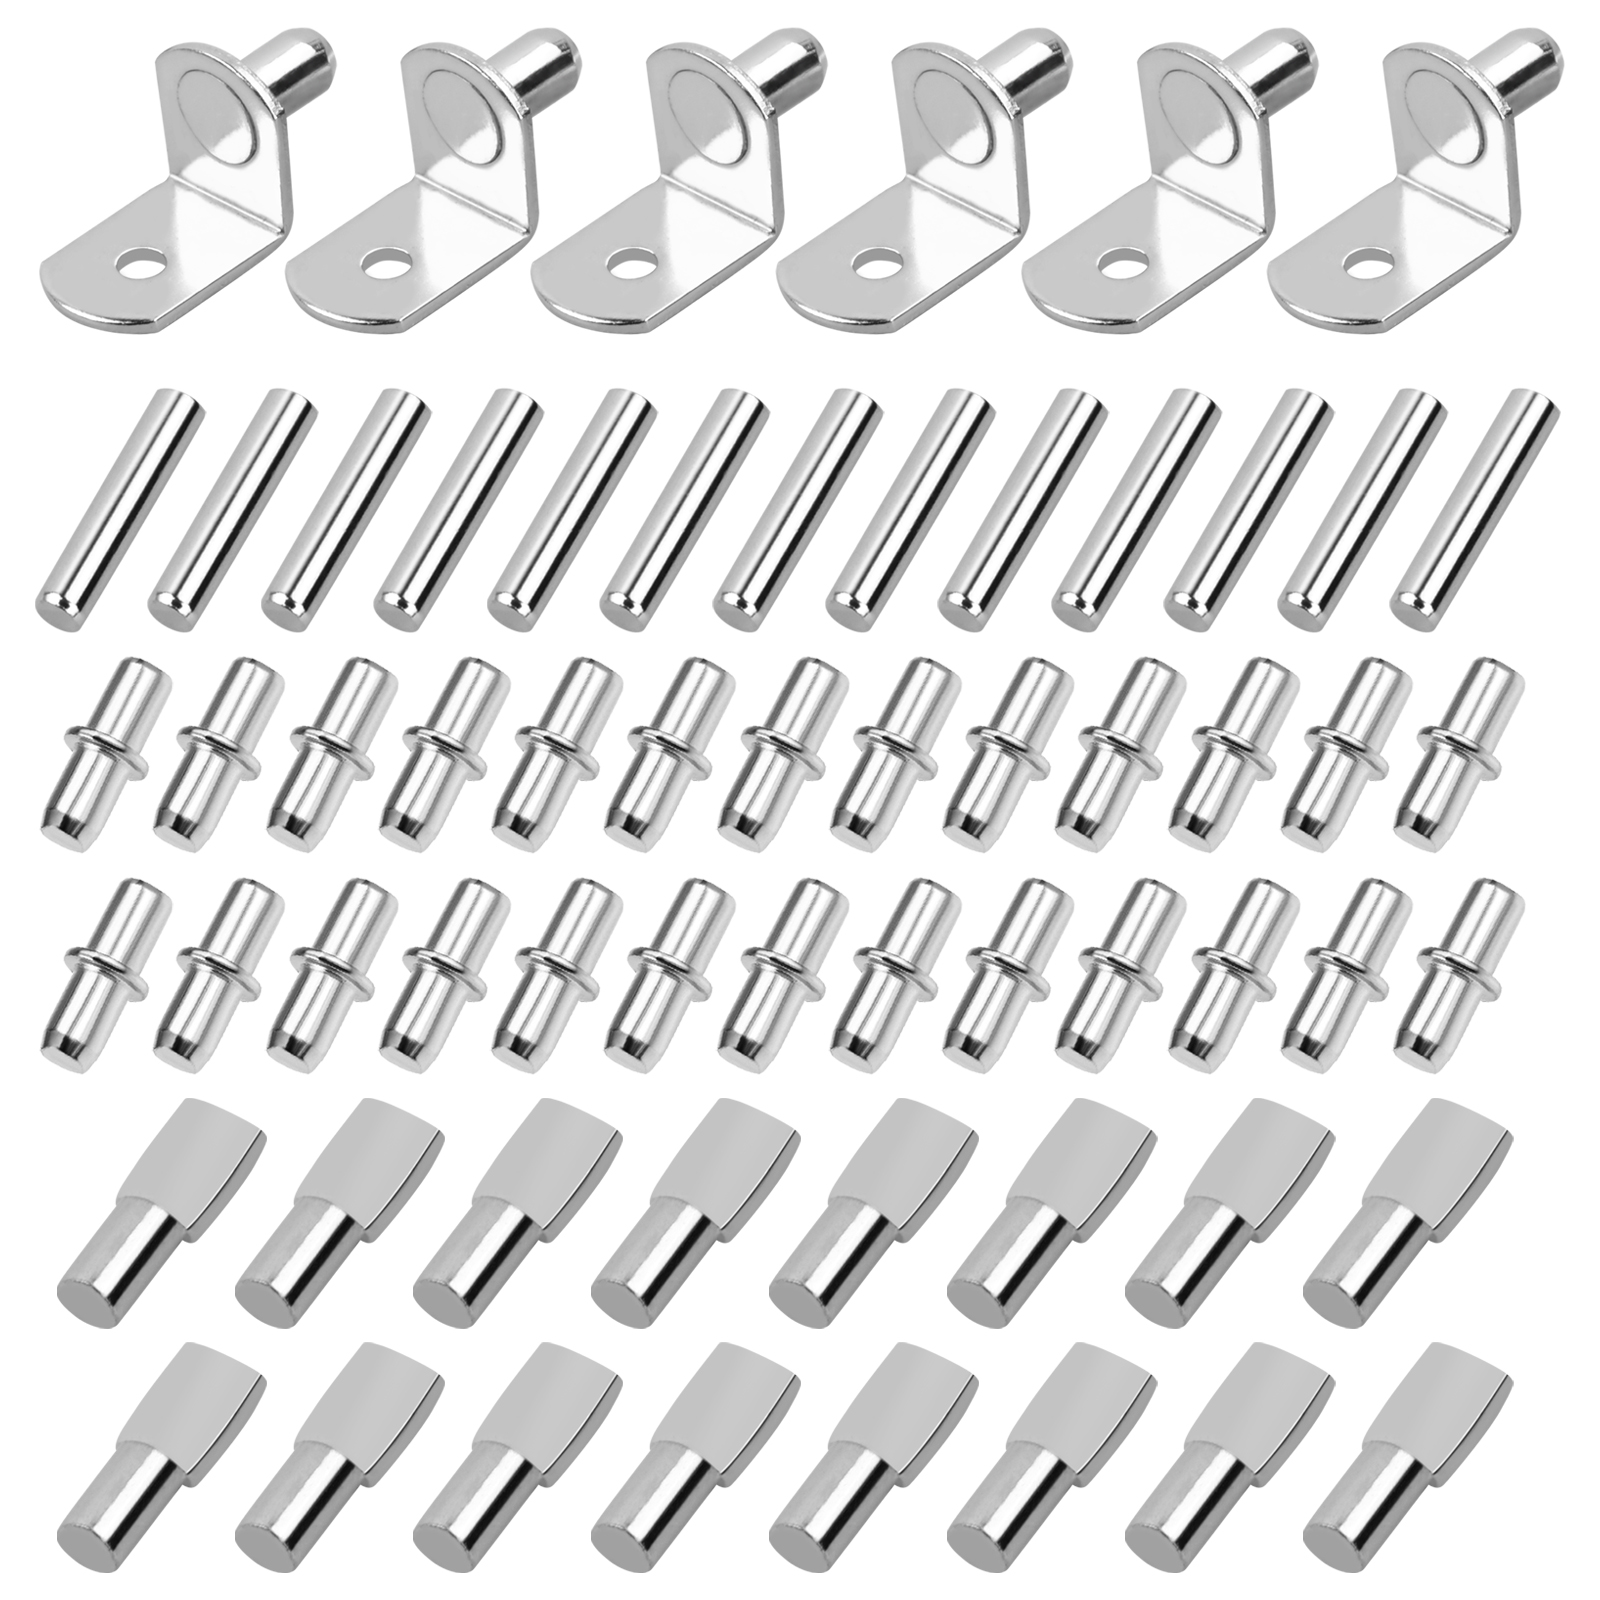 4/10pcs Adhesive Shelf Support Pegs Shelf Support Adhesive Pegs Closet  Cabinet Shelf Support Clips Wall Hangers Strong Holders